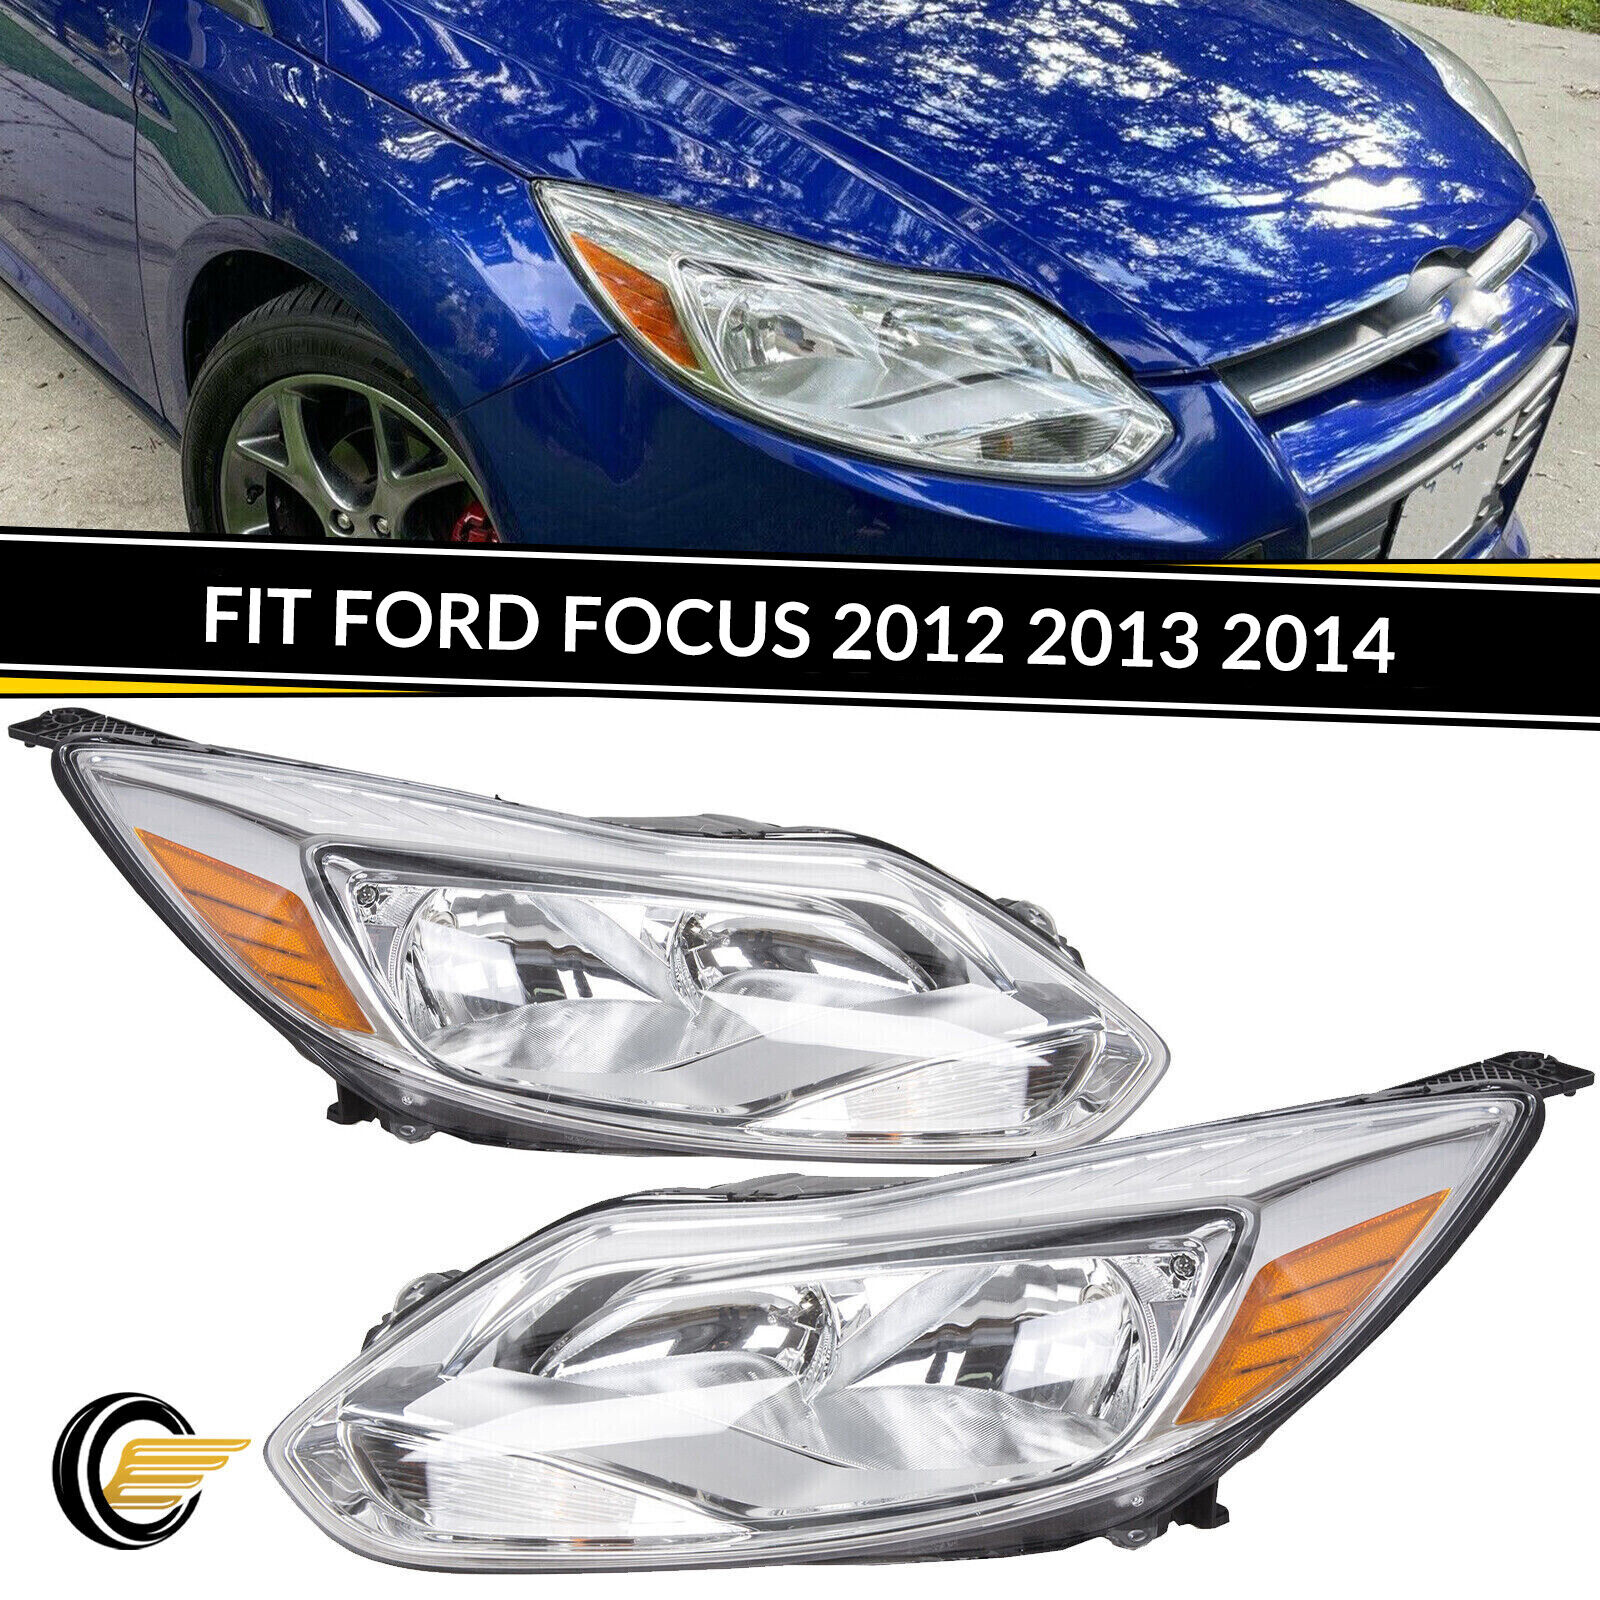 Fit 2012-2014 Ford Focus Headlights HeadLamp Assembly Left+Right Light w/Blub